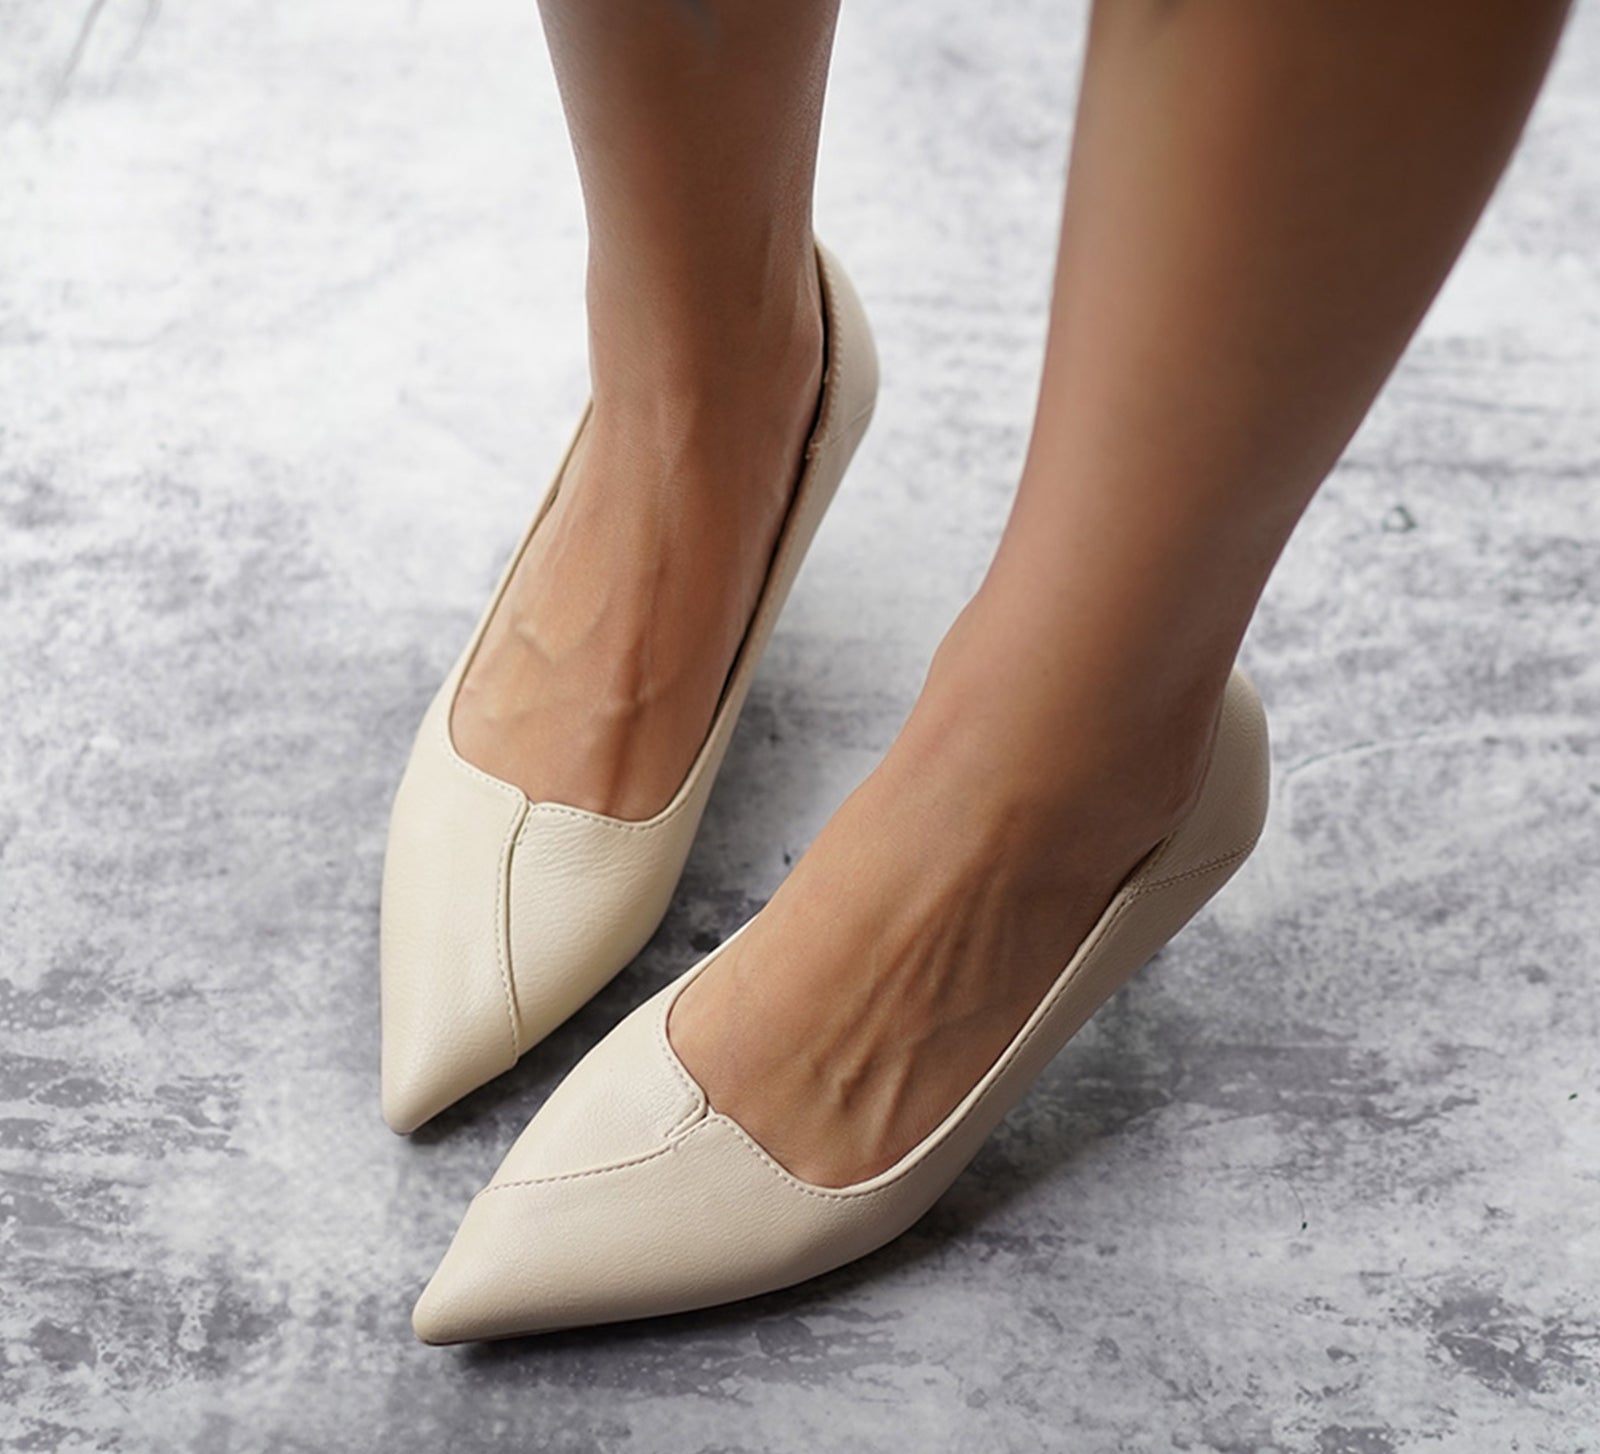 "Effortless Elegance: Convertible Pumps in White with a stylish kitten heel, featuring classic details for a polished and sophisticated style